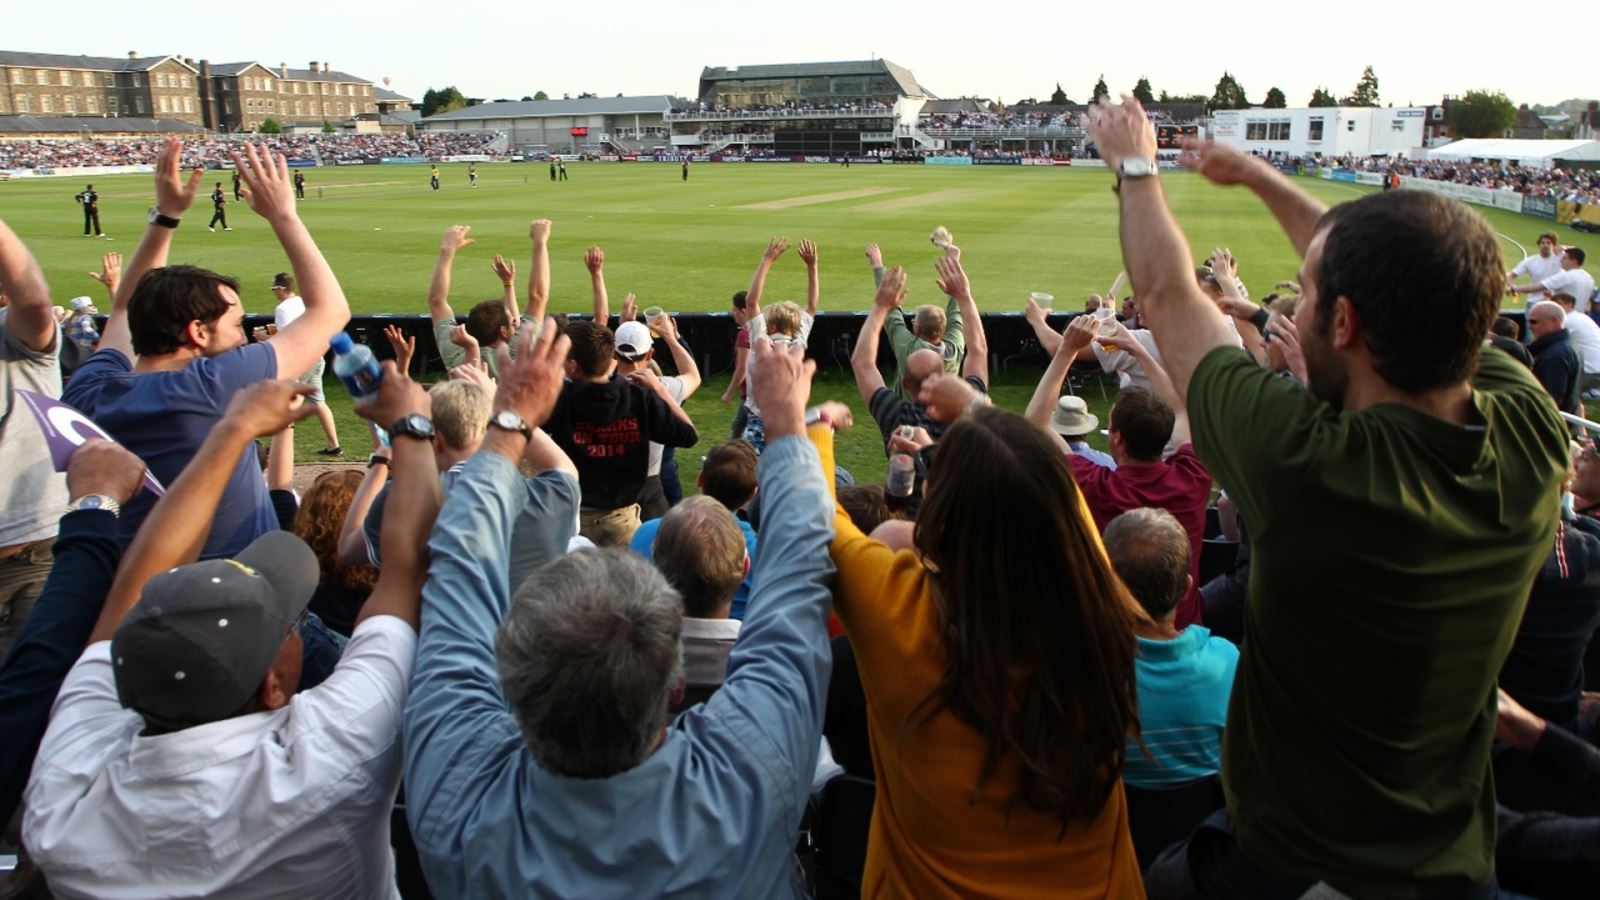 Fans cheer at Bristol County Ground with fans